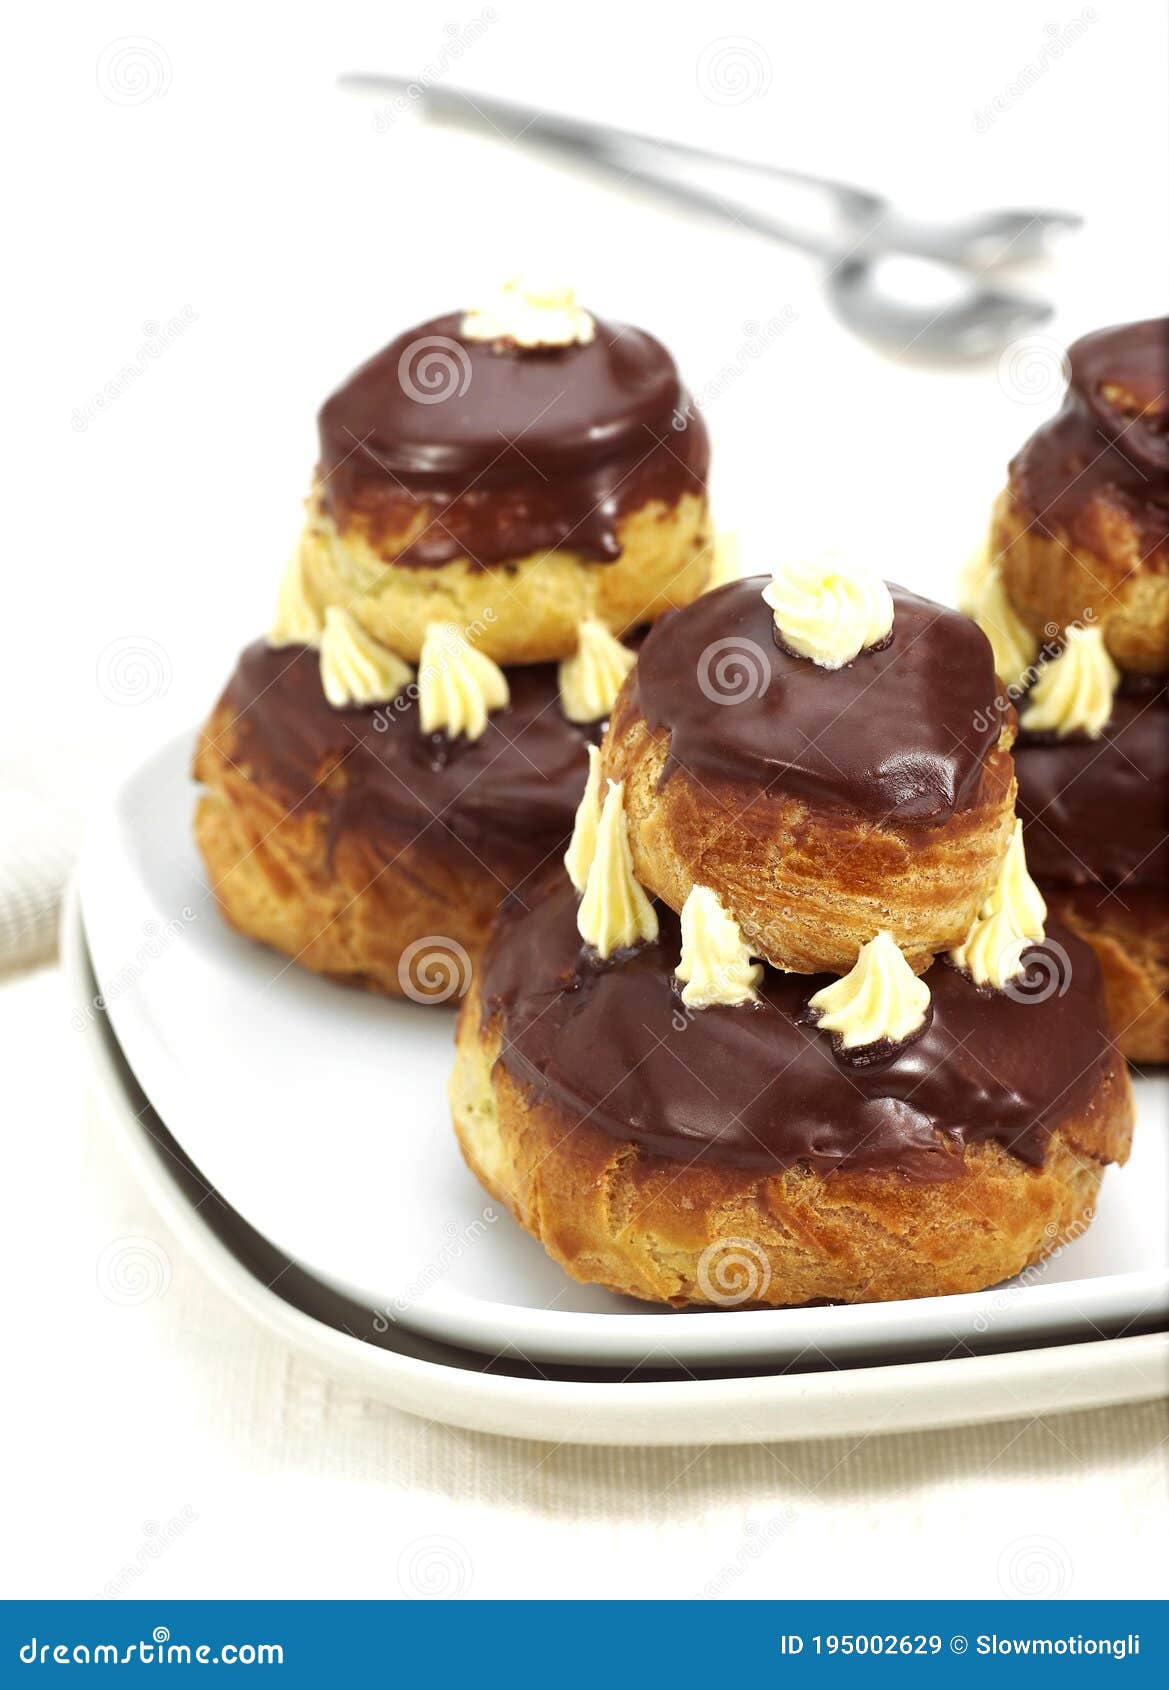 FRENCH CAKE CALLED CHOCOLATE RELIGIEUSE Stock Image - Image of puff ...